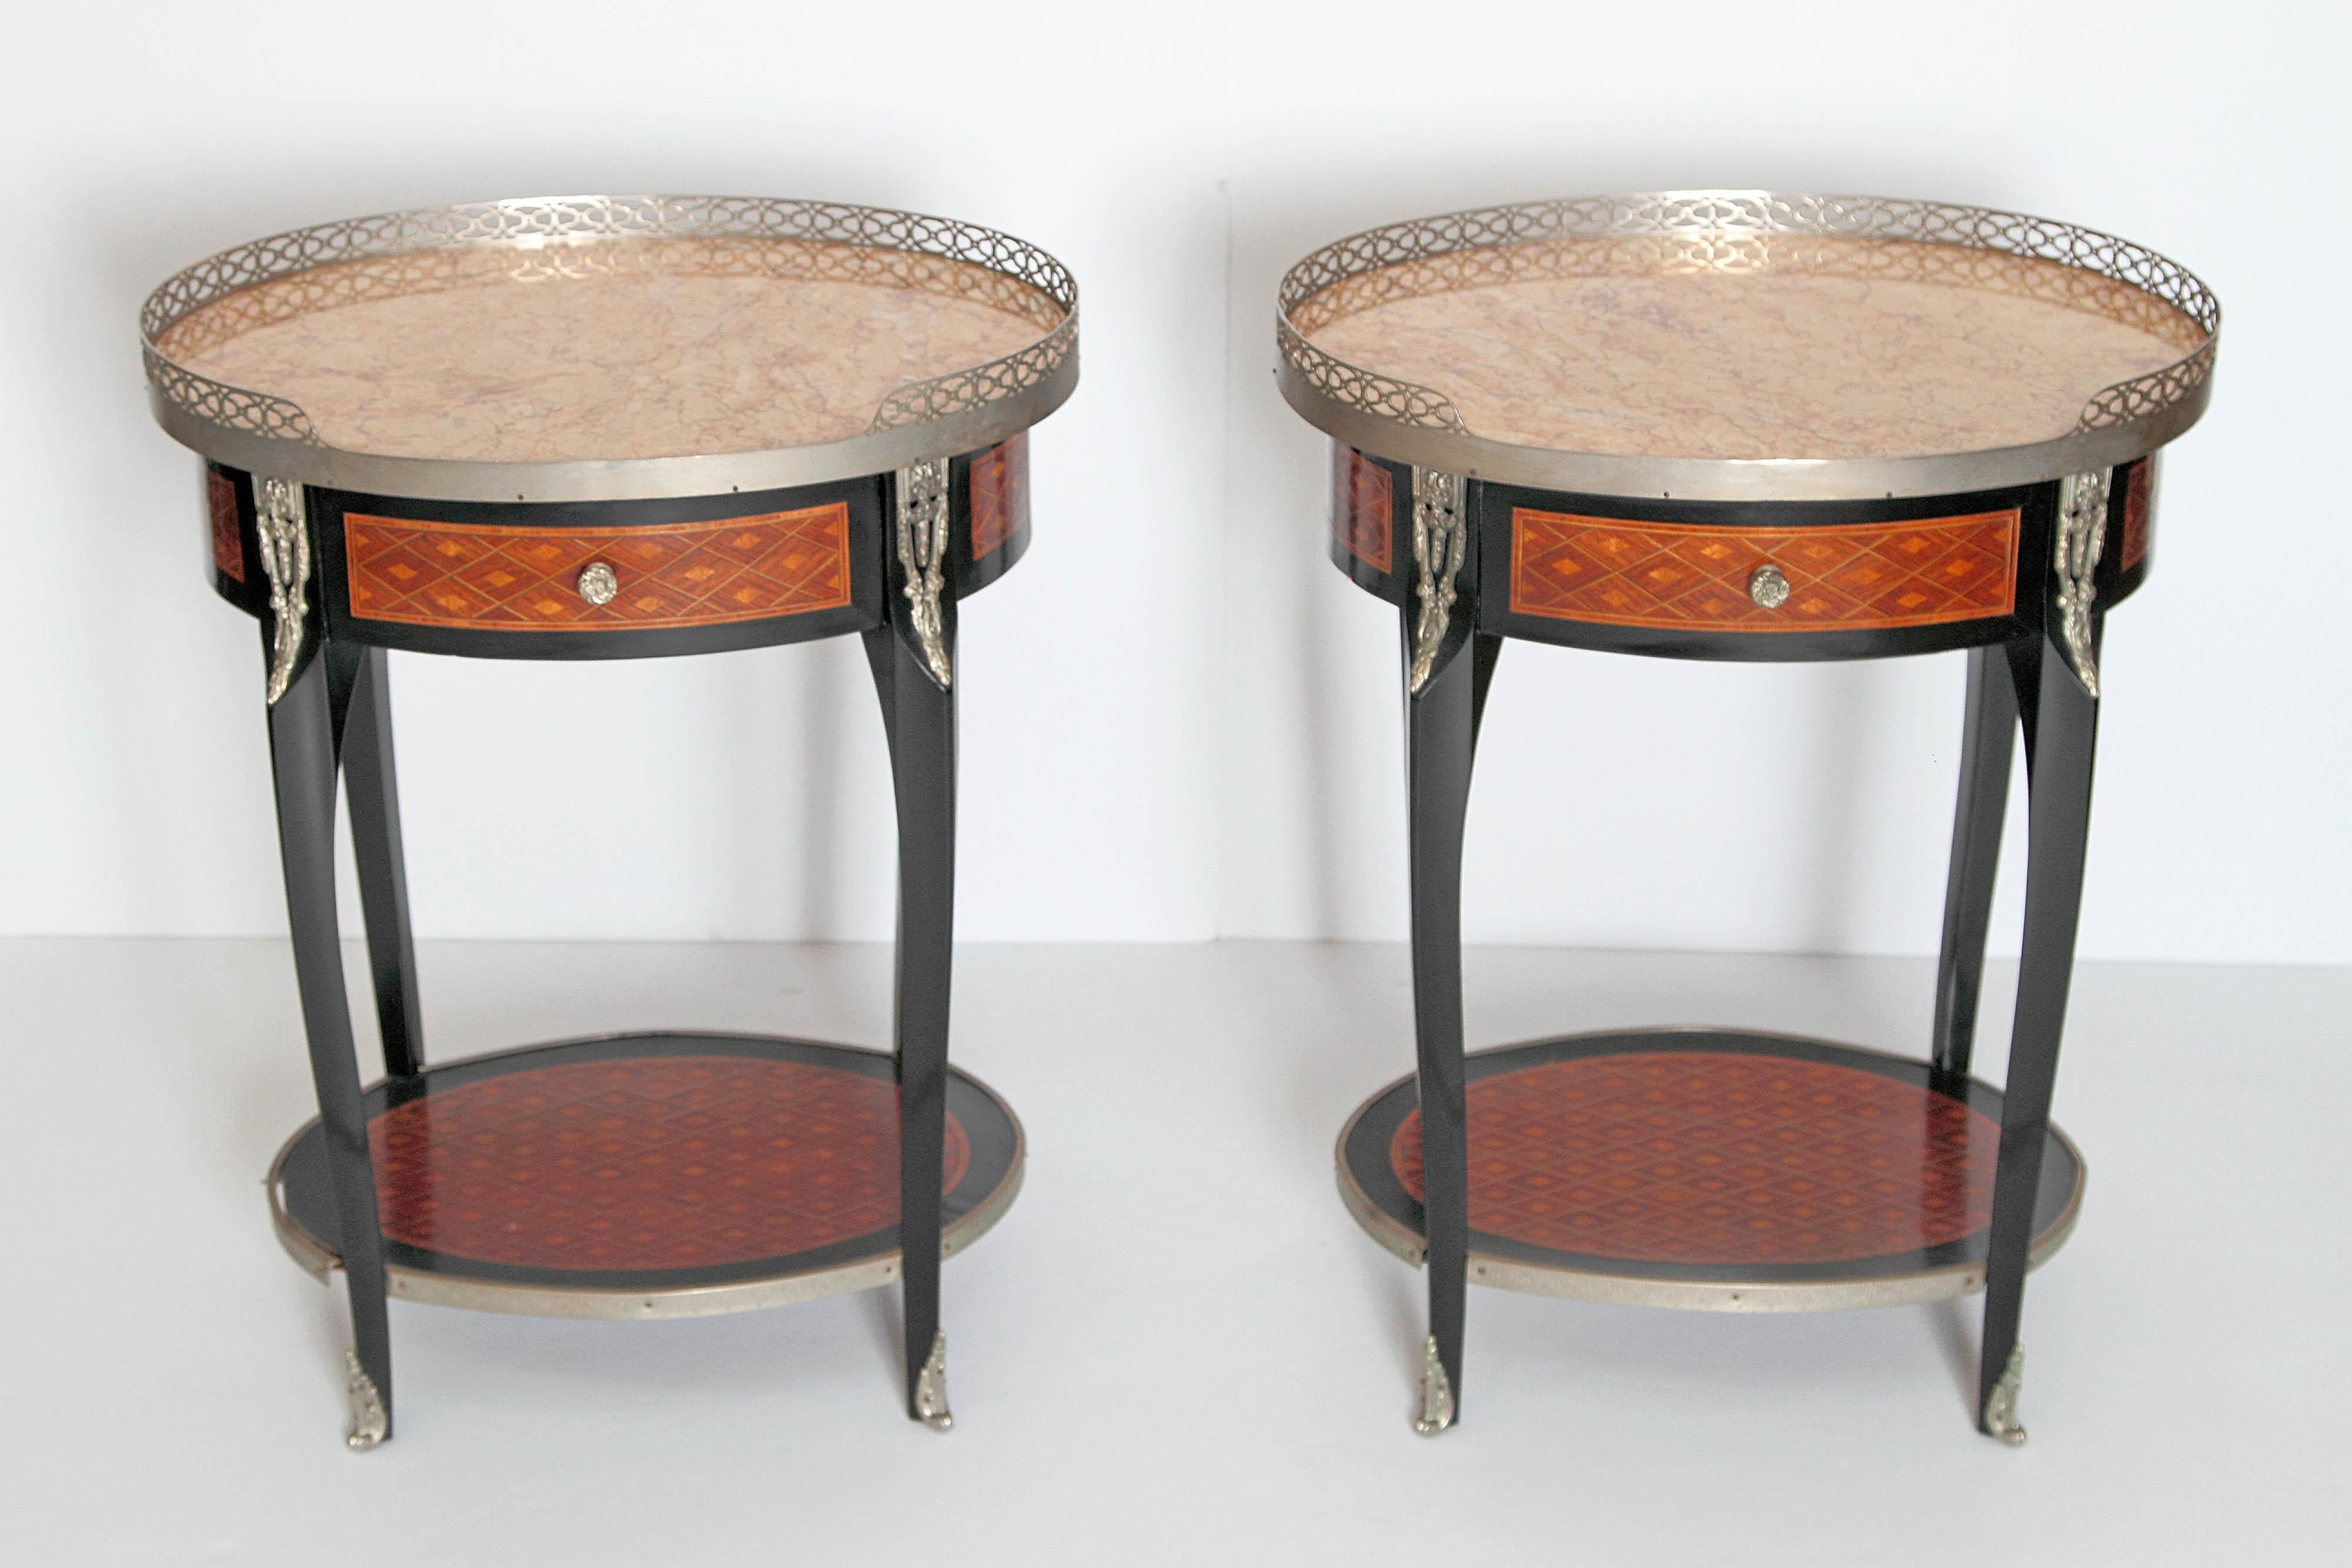 A pair of French Louis XVI-style oval guéridons, occasional or side tables with peach colored stone tops. Silver gilt gallery around top with other silver gilt bronze decorative mounts. Each with single drawer, apron, and lower shelf decorated in an